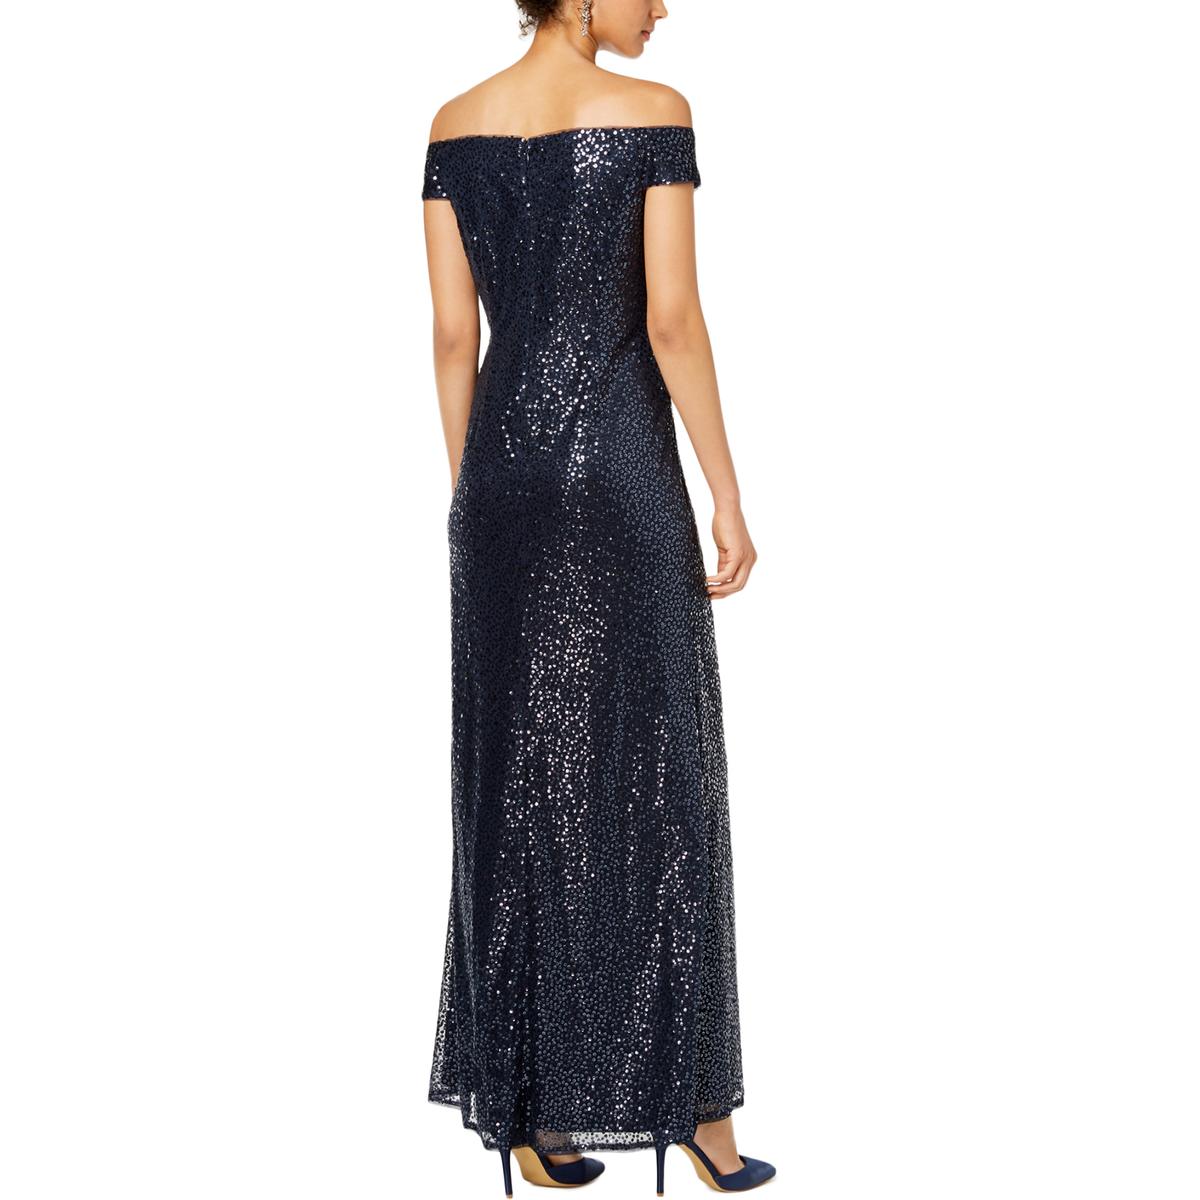 Adrianna Papell Womens Navy Sequined Formal Evening Dress Gown 4 BHFO ...